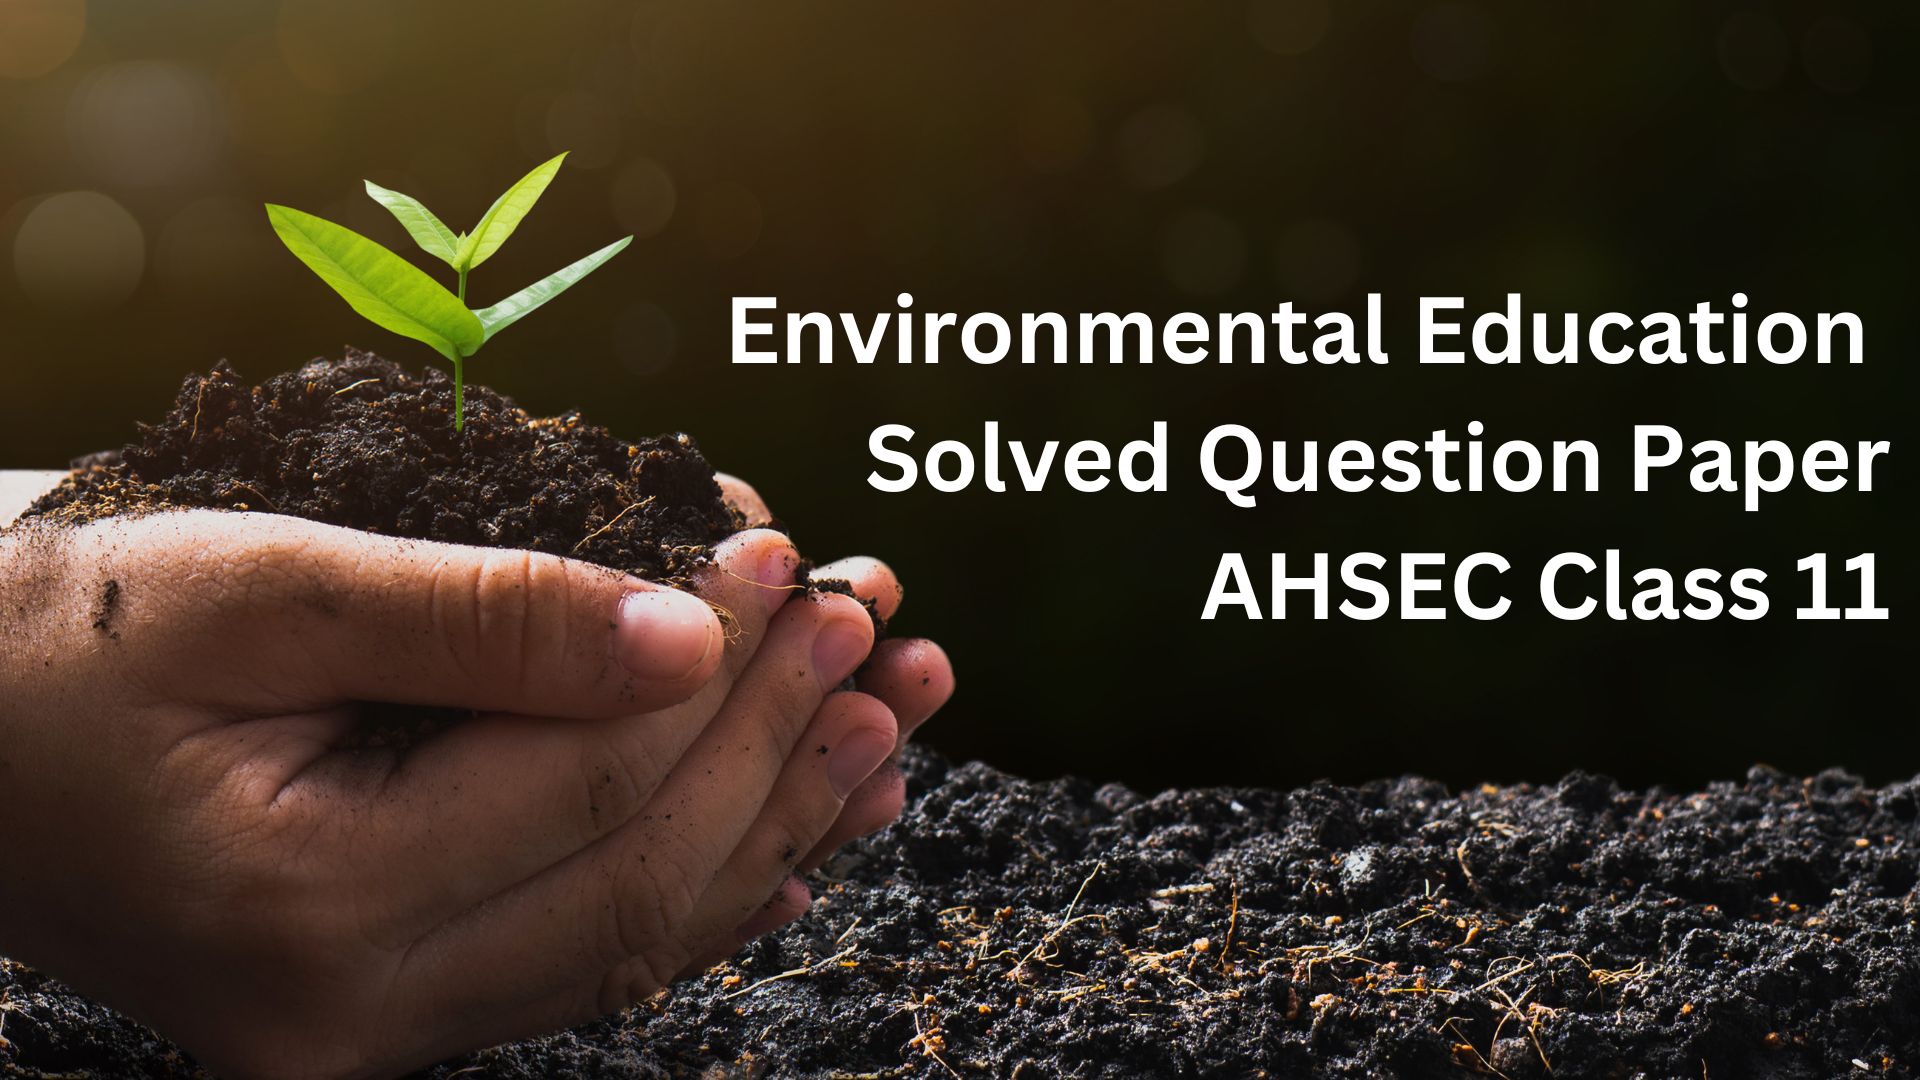 Environmental Education Solved Question Paper 2019